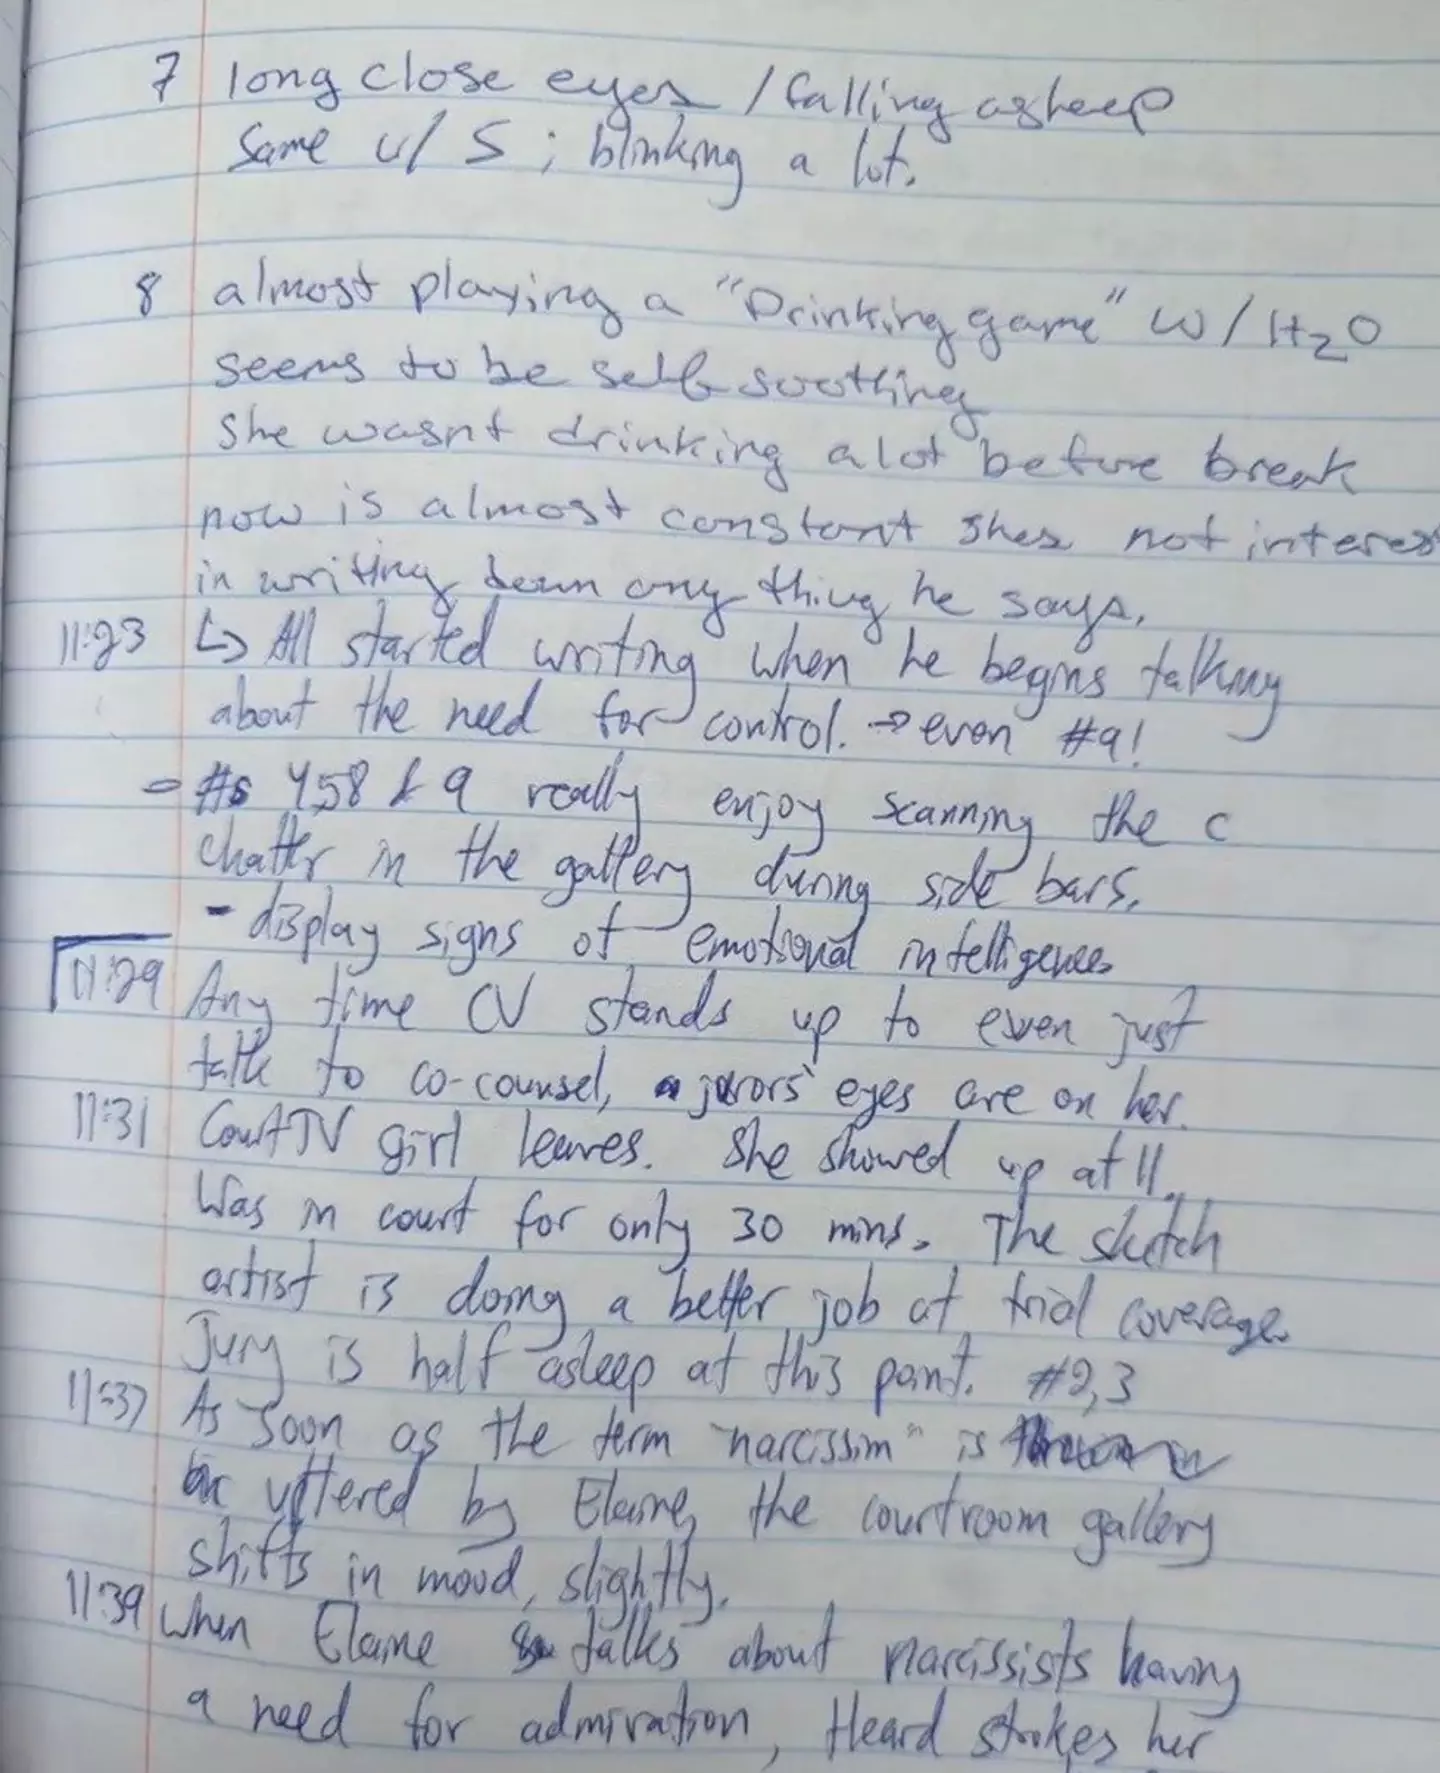 Larry's notebook consists of around twenty pages of notes per day.